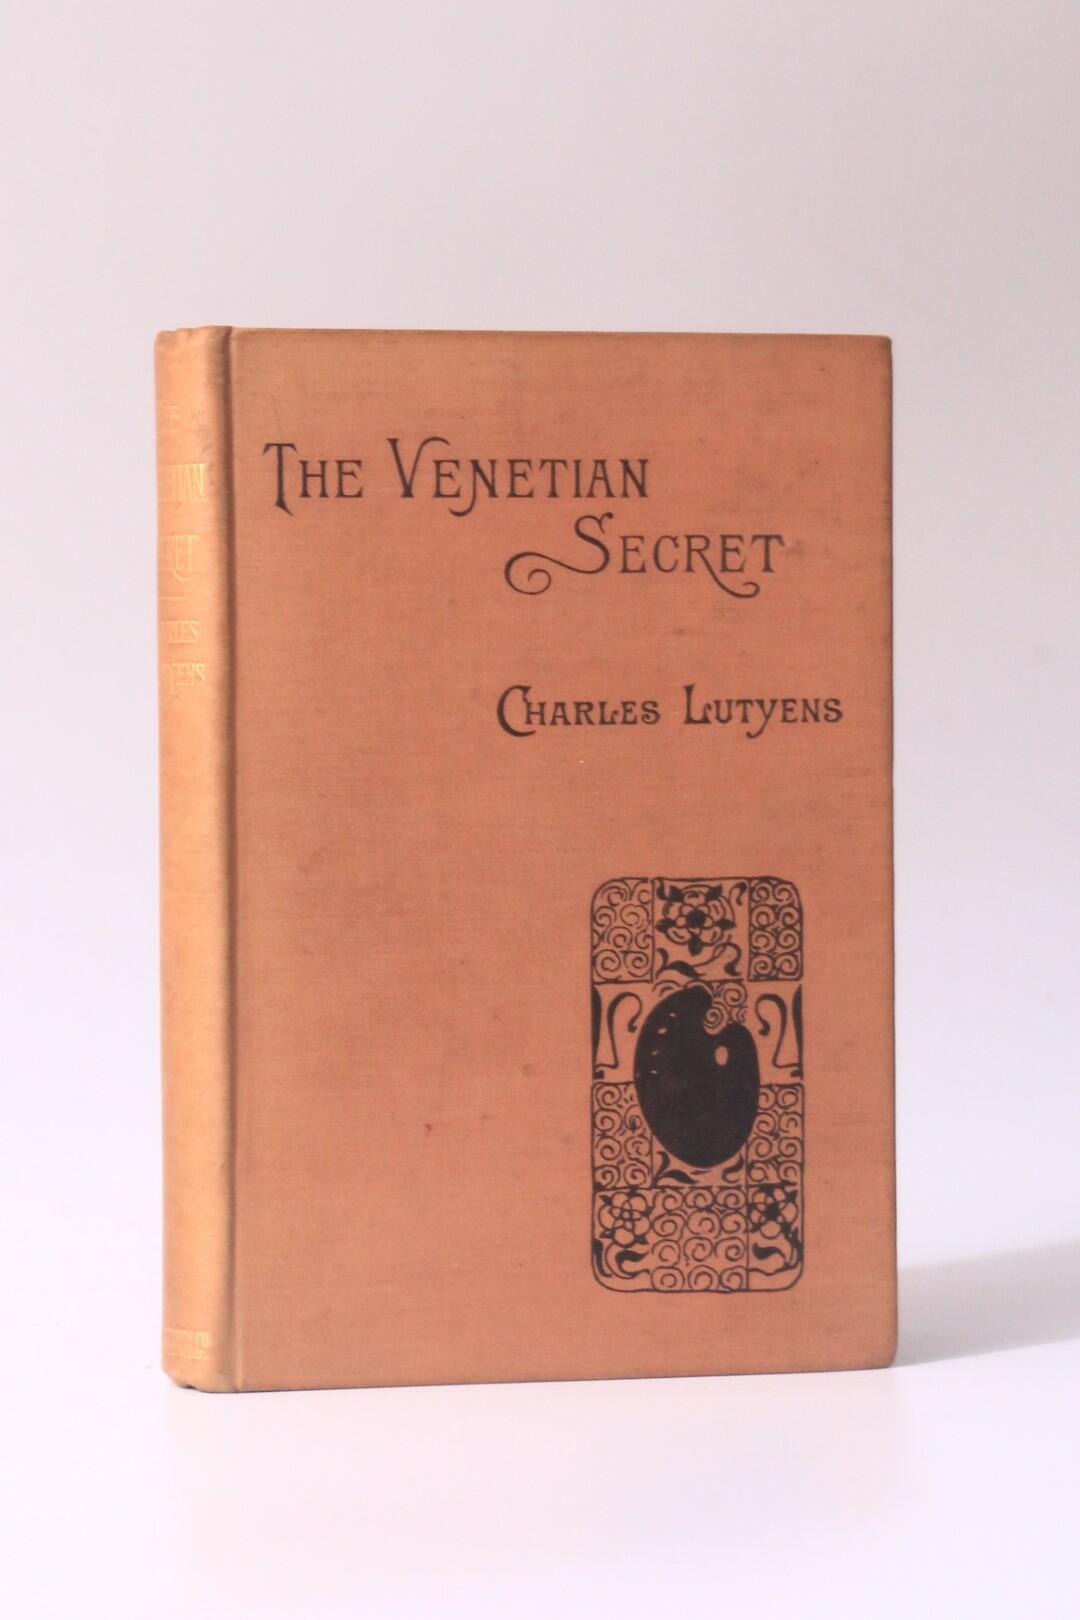 Charles Lutyens - The Venetian Secret - Digby, Long and Co., 1893, First Edition.